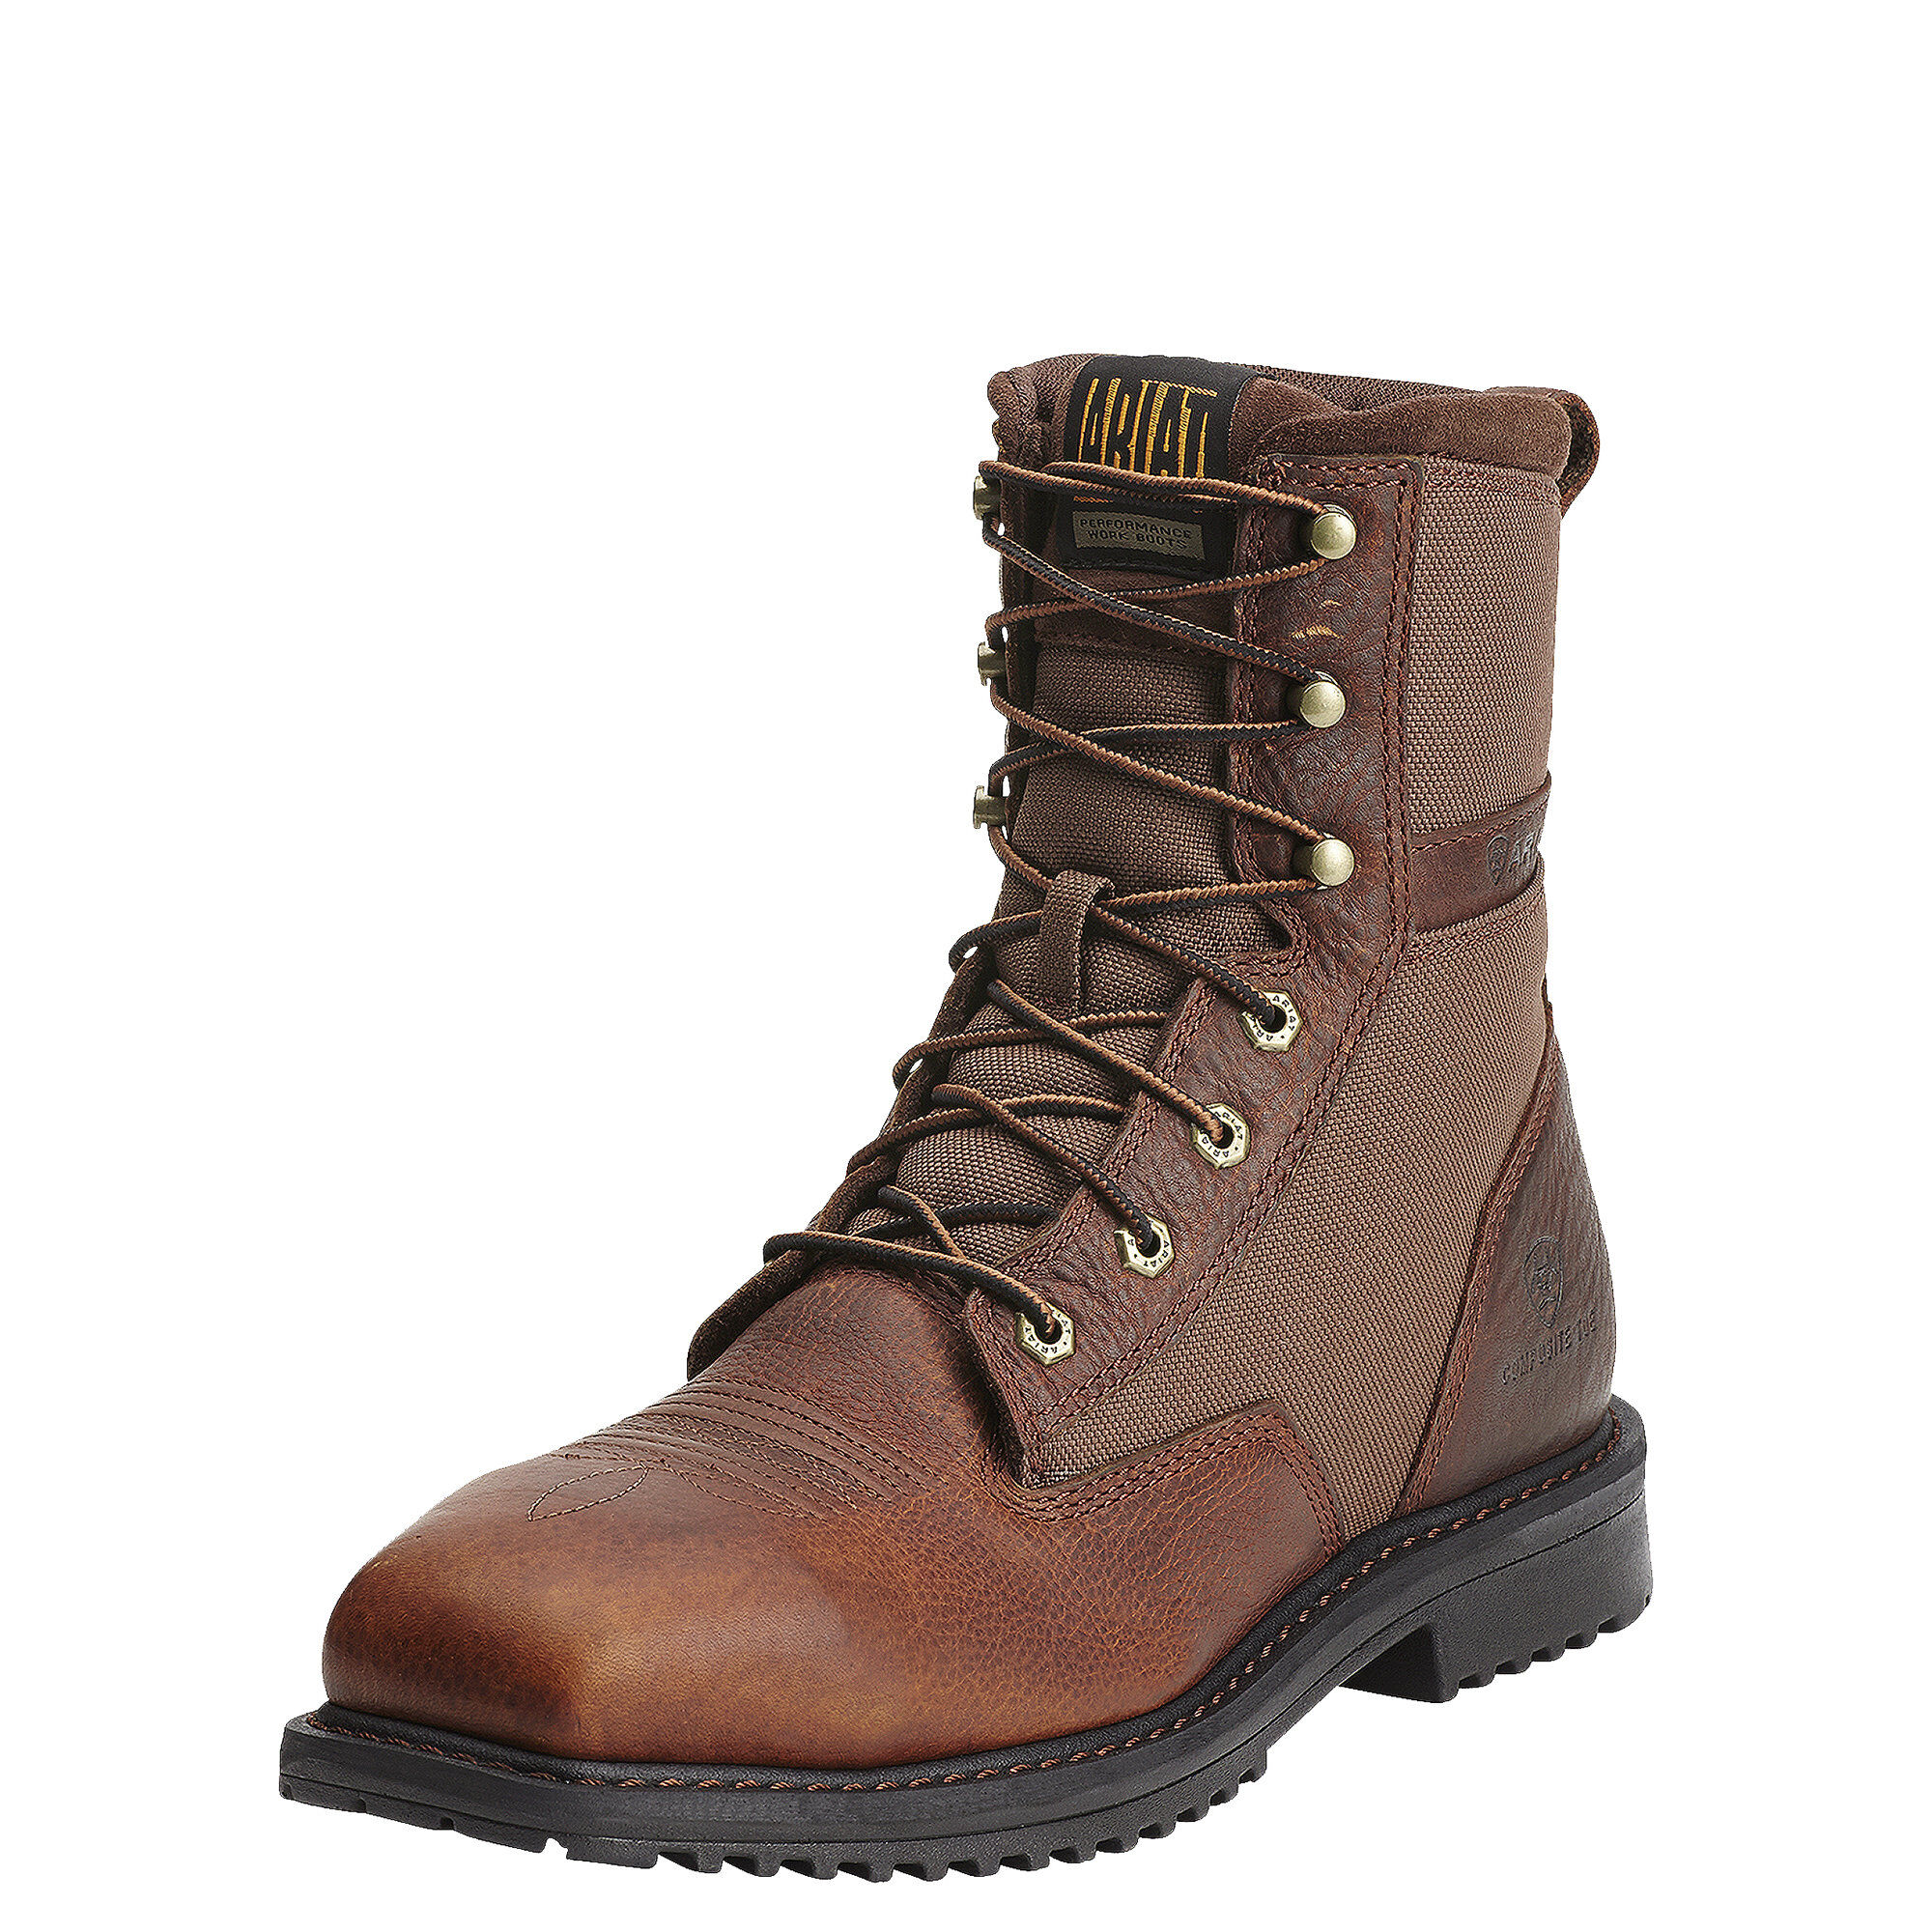 superdry boots mens